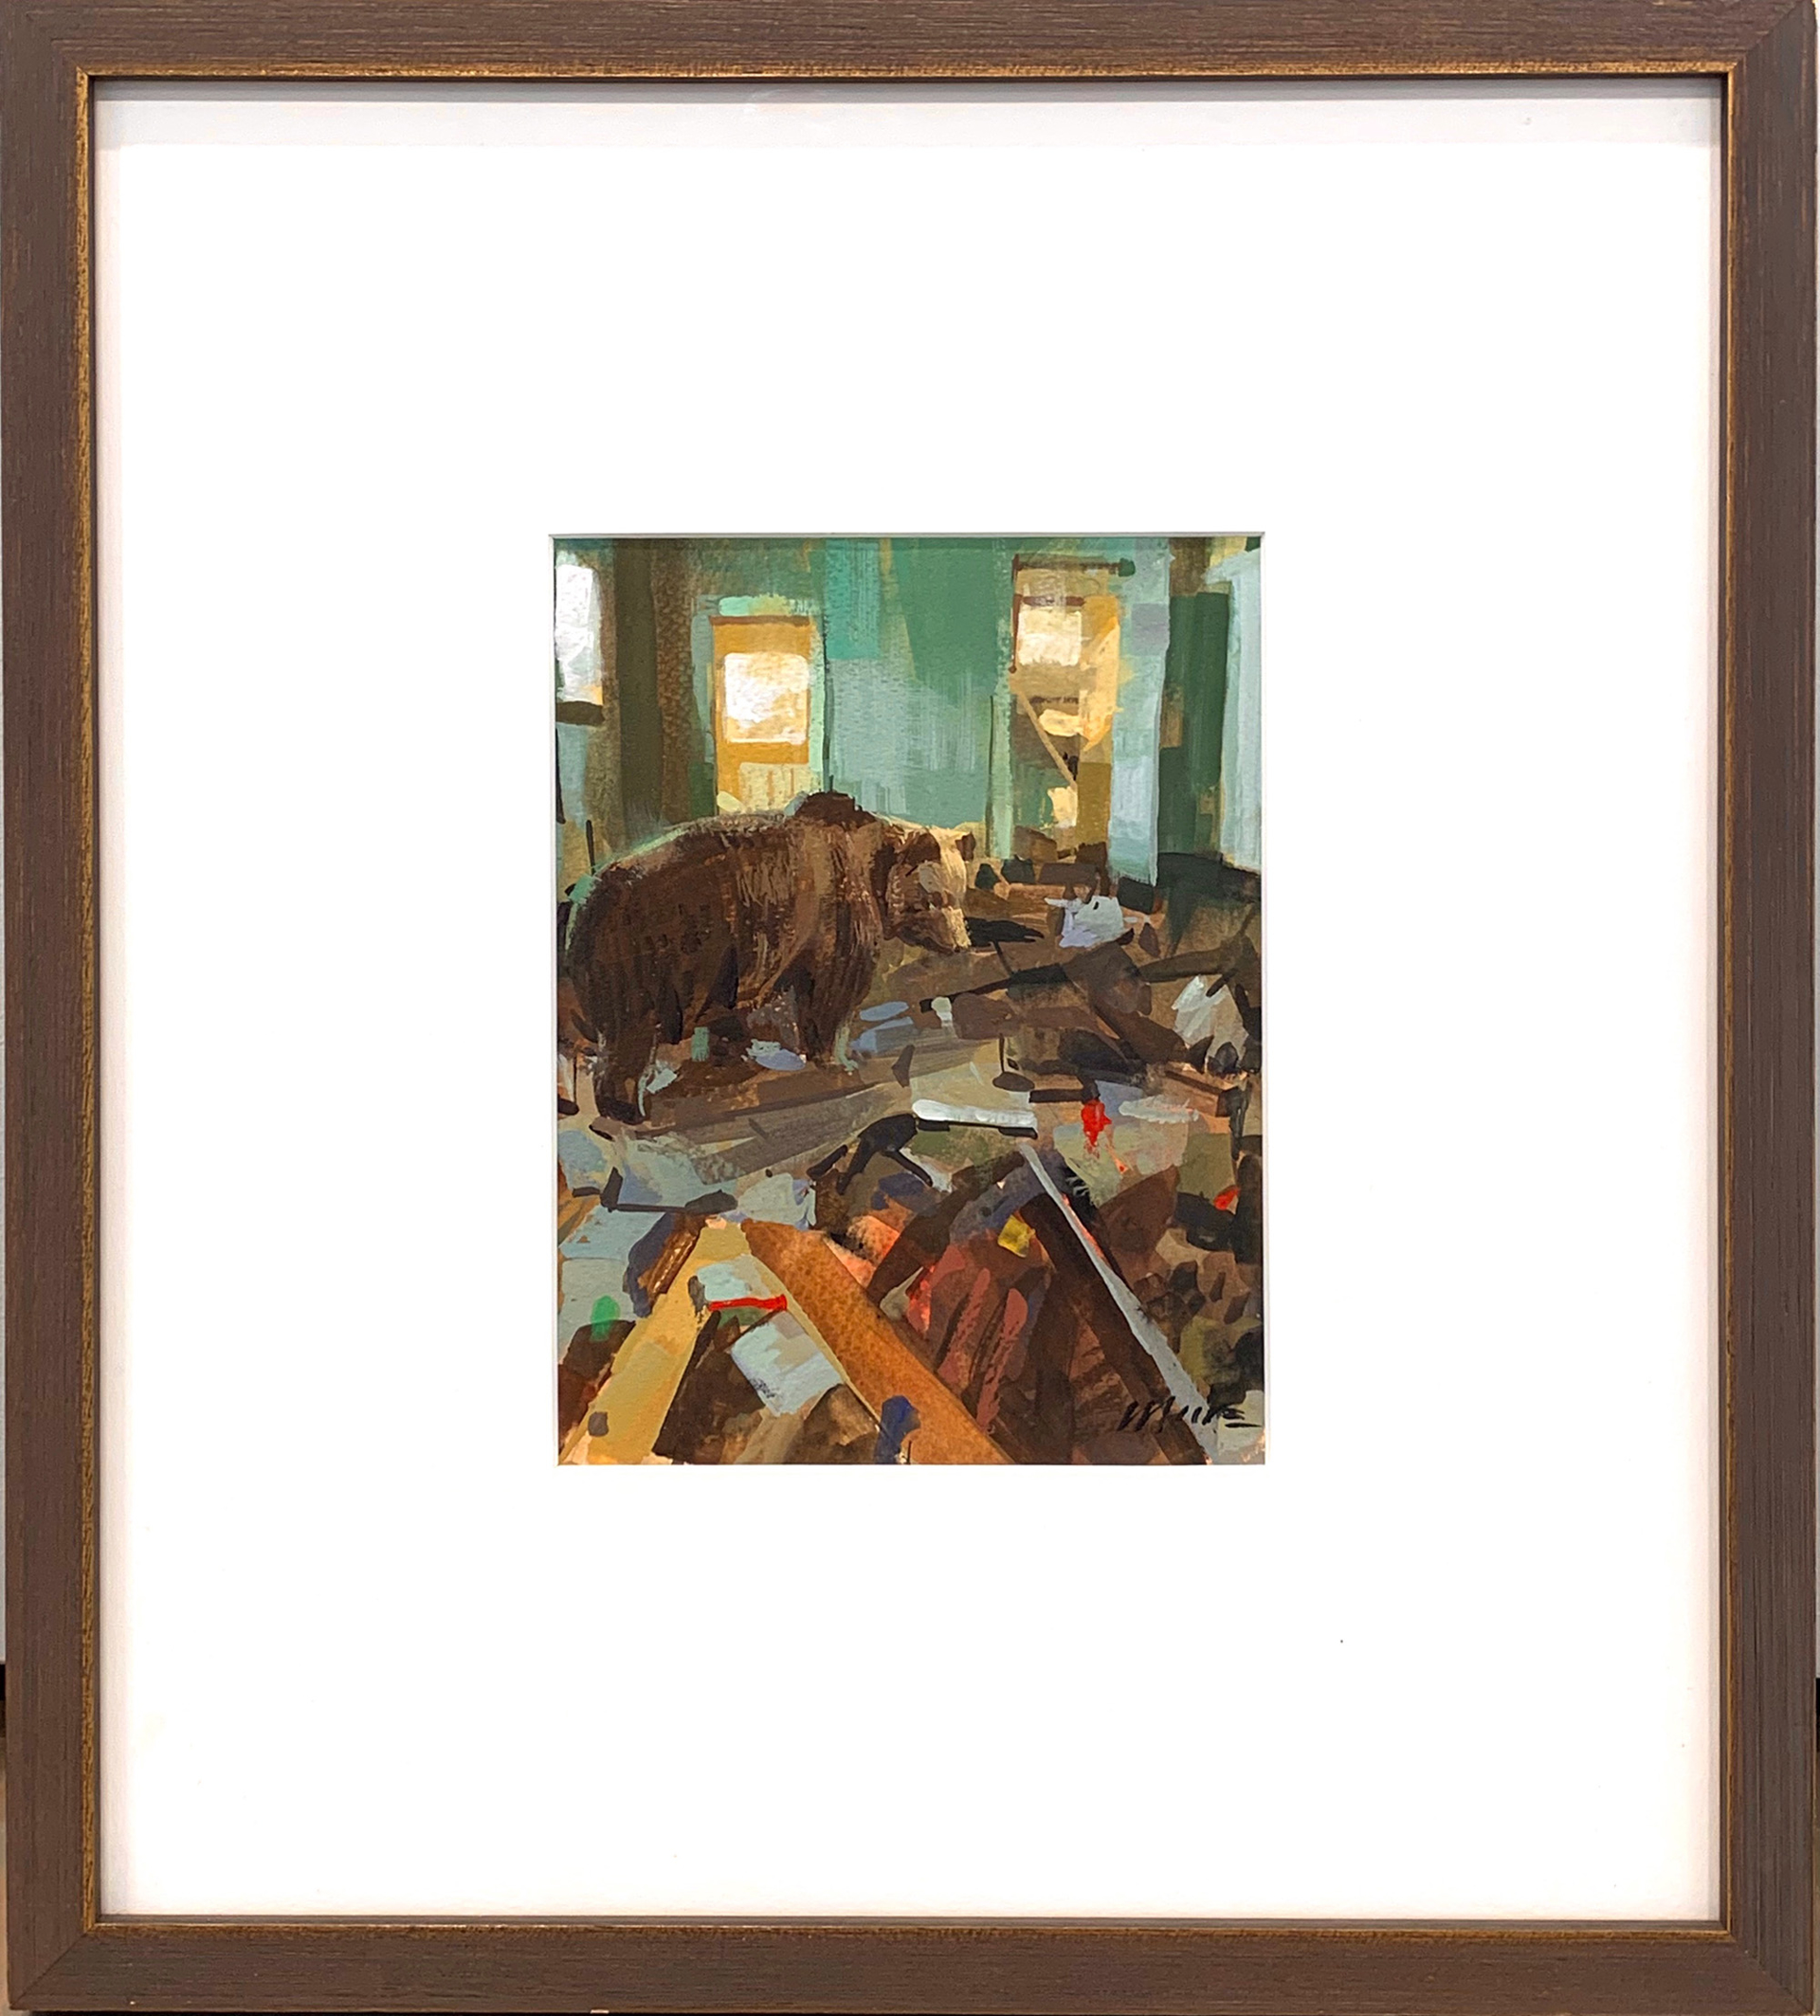 Gouache On Paper Painting Of A Grizzly Bear In a Dilapidated Room, Part Of Series By Larry Moore, Framed And Available at Gallery Wild